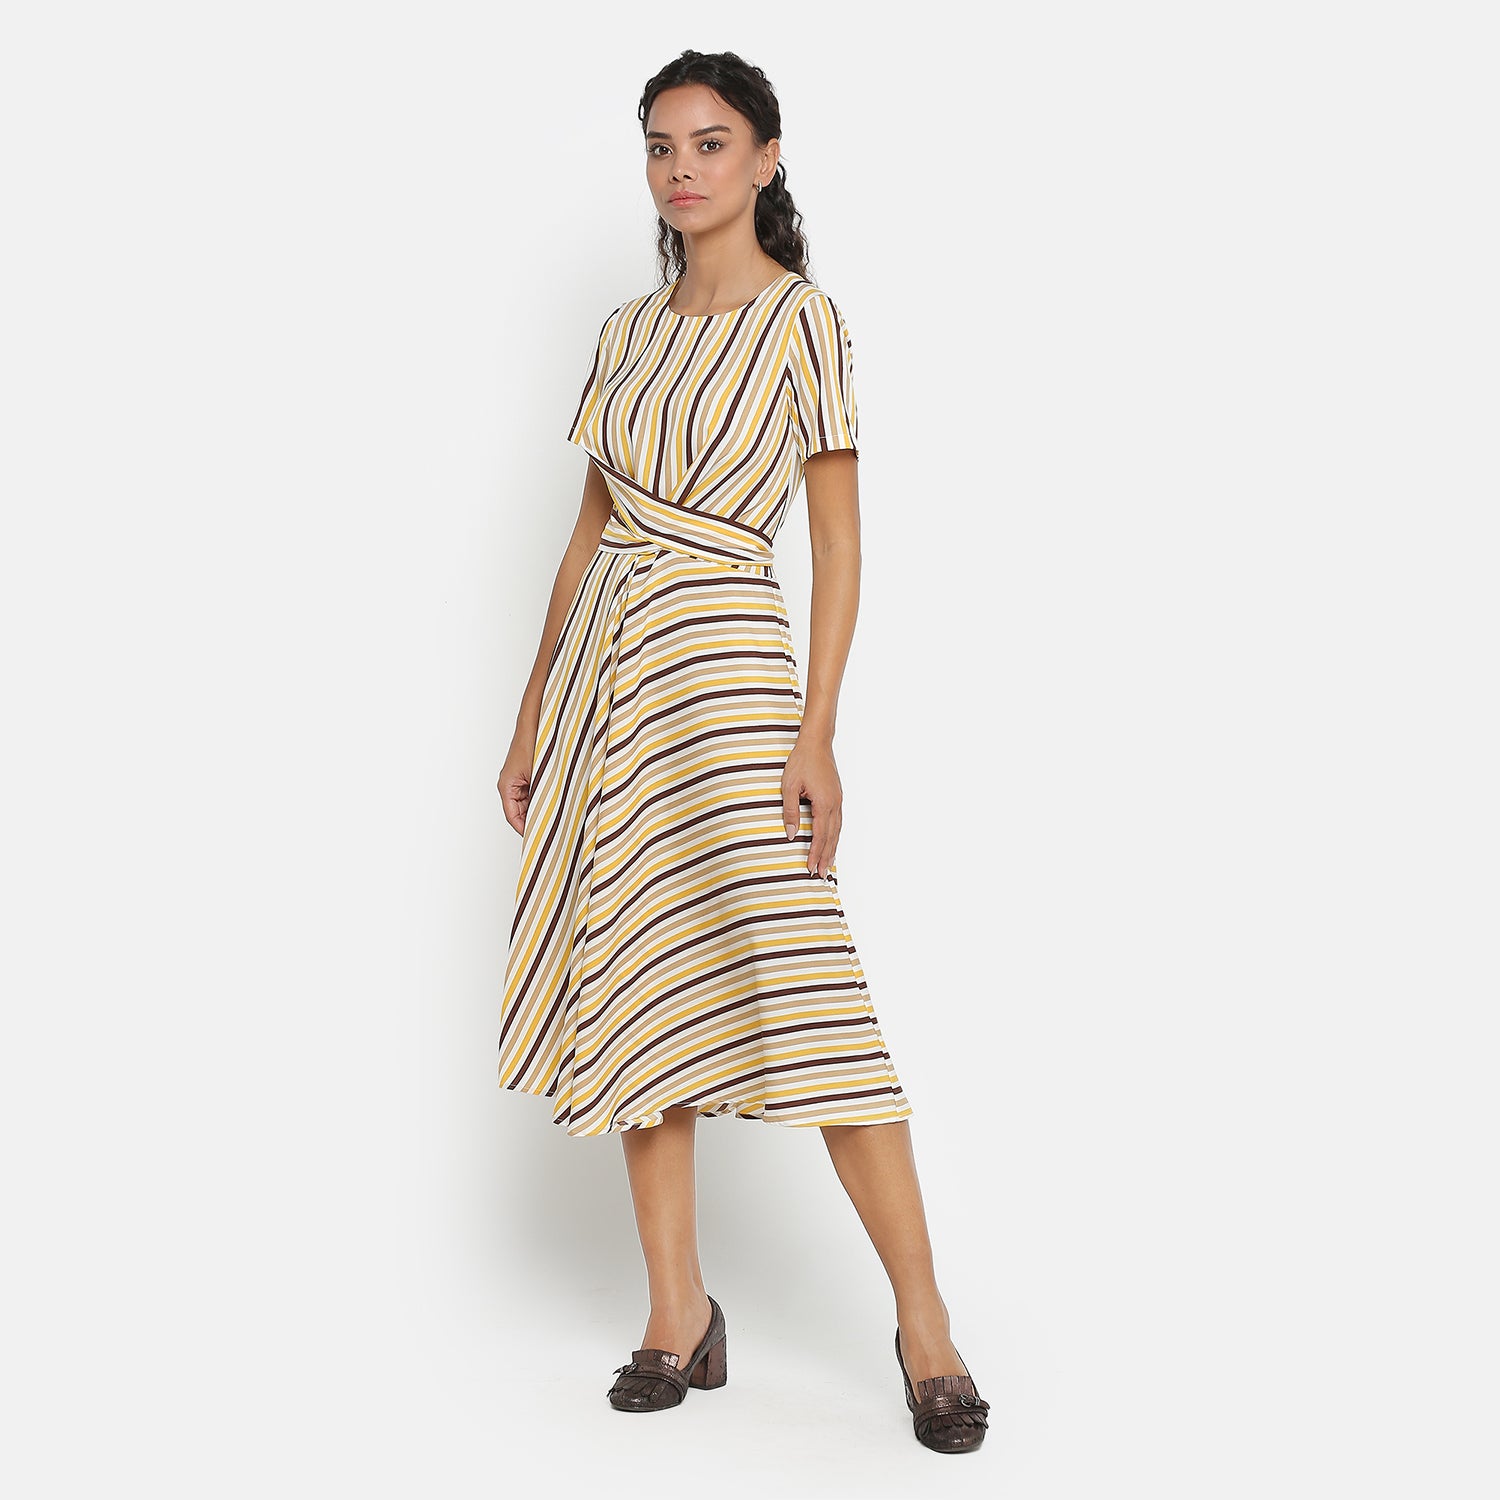 Yellow & brown stripe dress with front tie knot